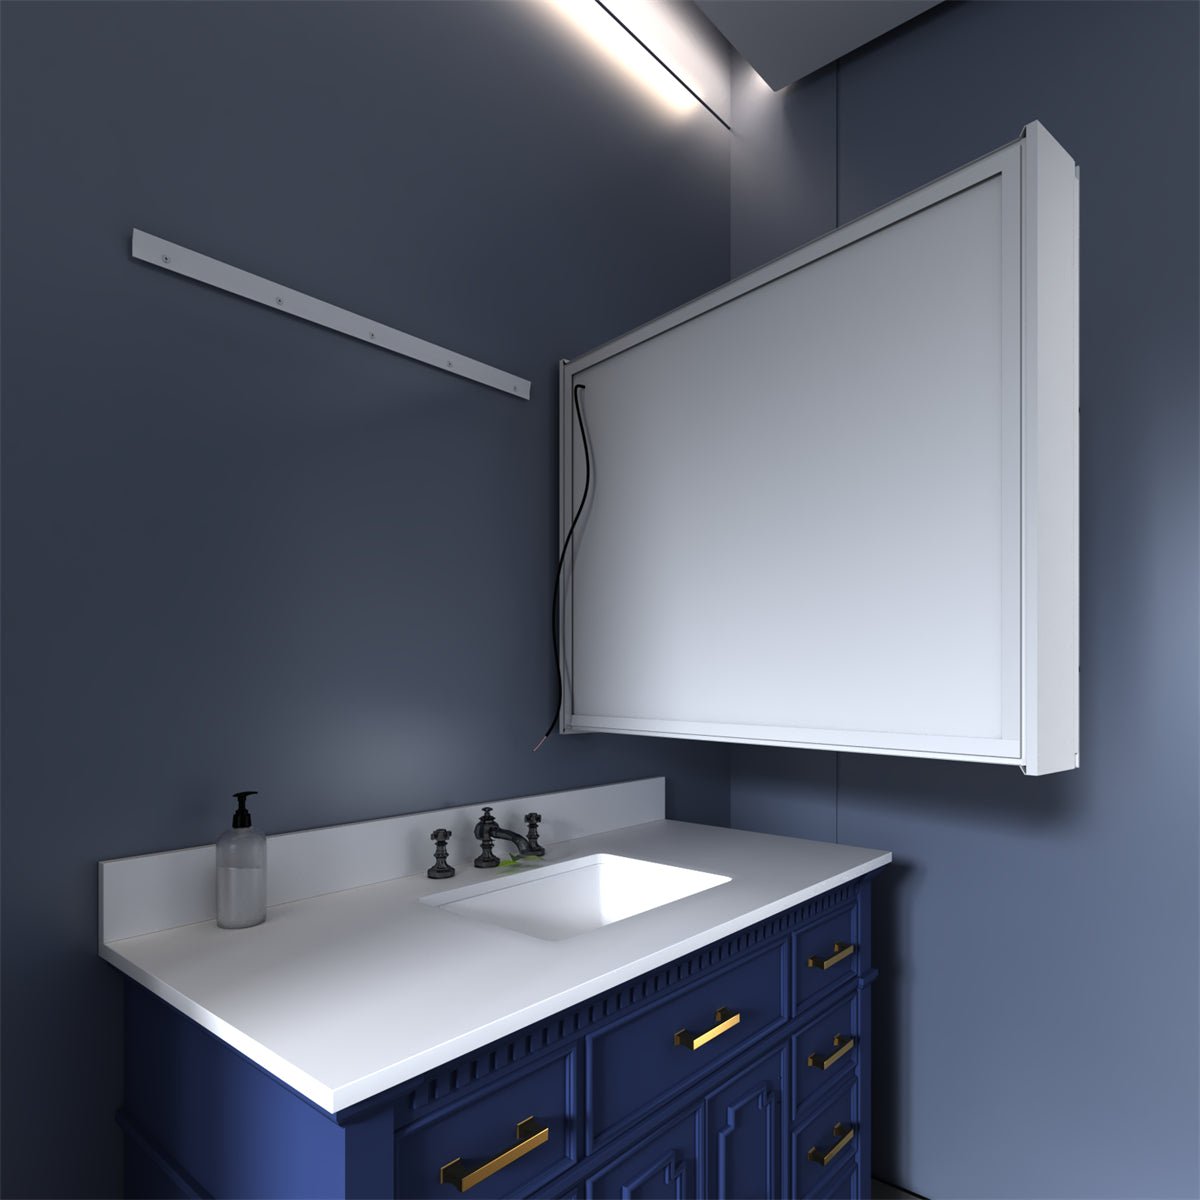 ExBrite 36" W x 32" H Surface or Recessed Mount Led Light Medicine Cabinet with Mirror - ExBriteUSA